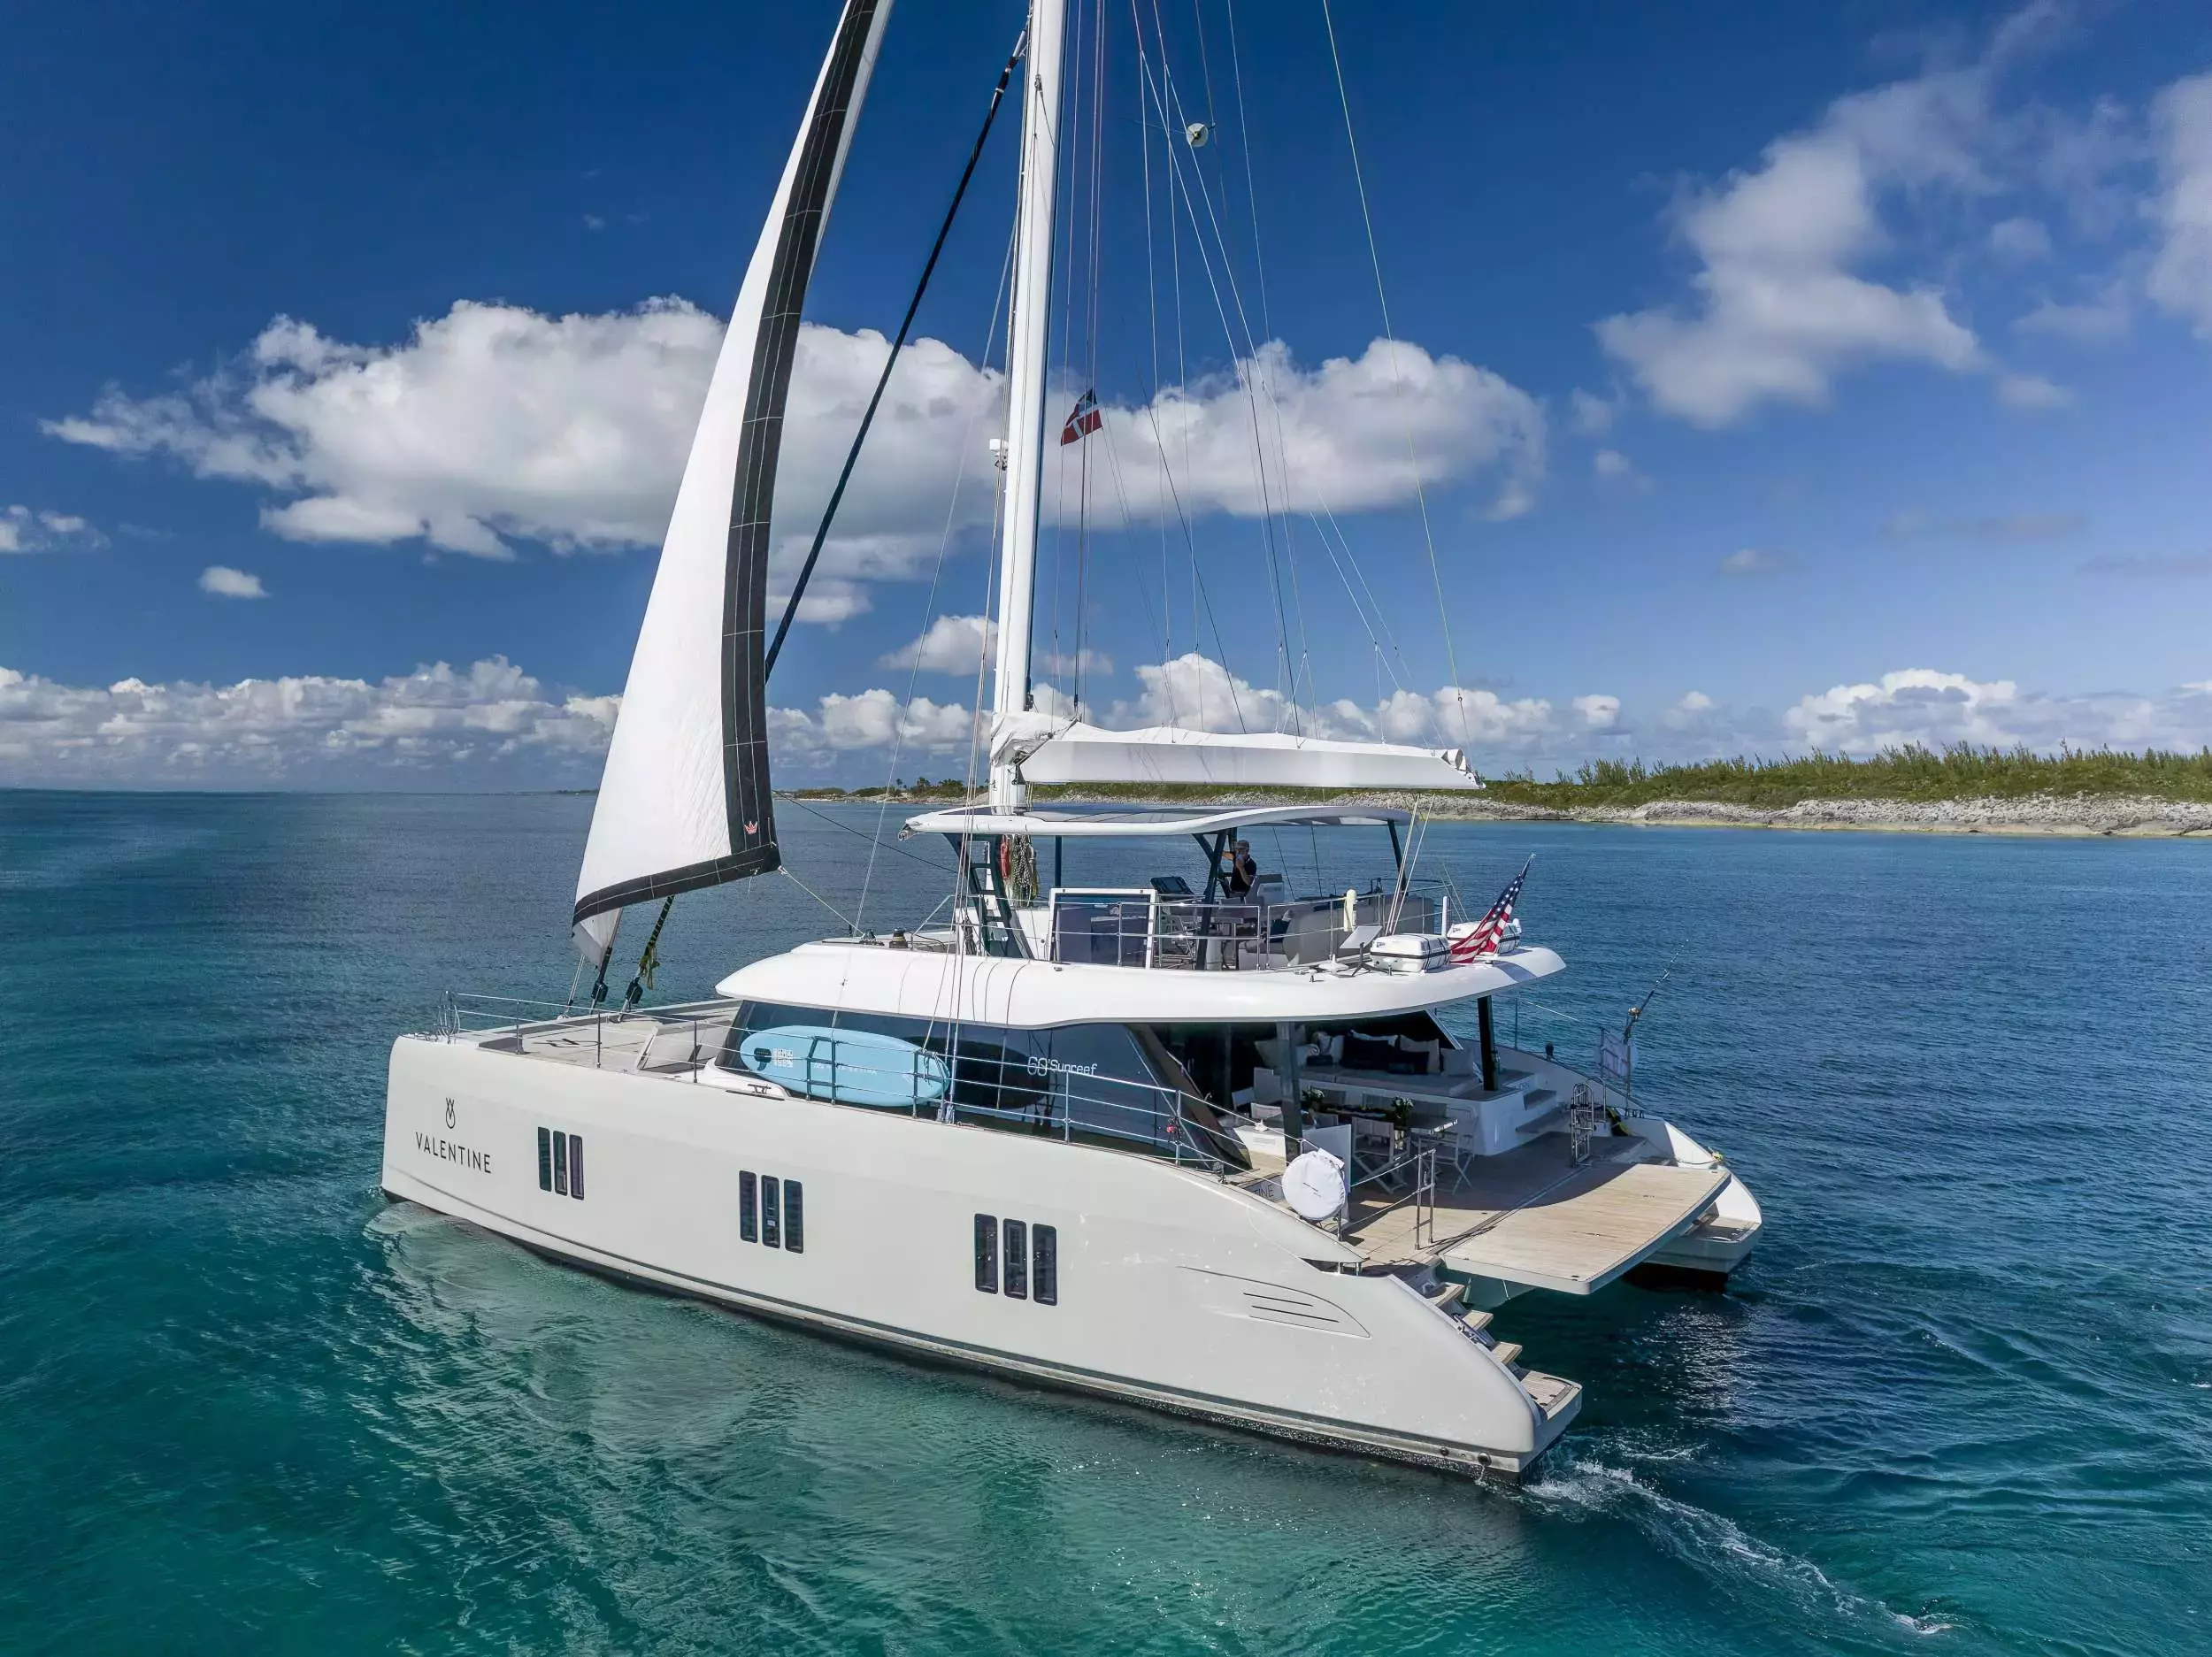 Valentine by Sunreef Yachts - Top rates for a Rental of a private Power Catamaran in Puerto Rico